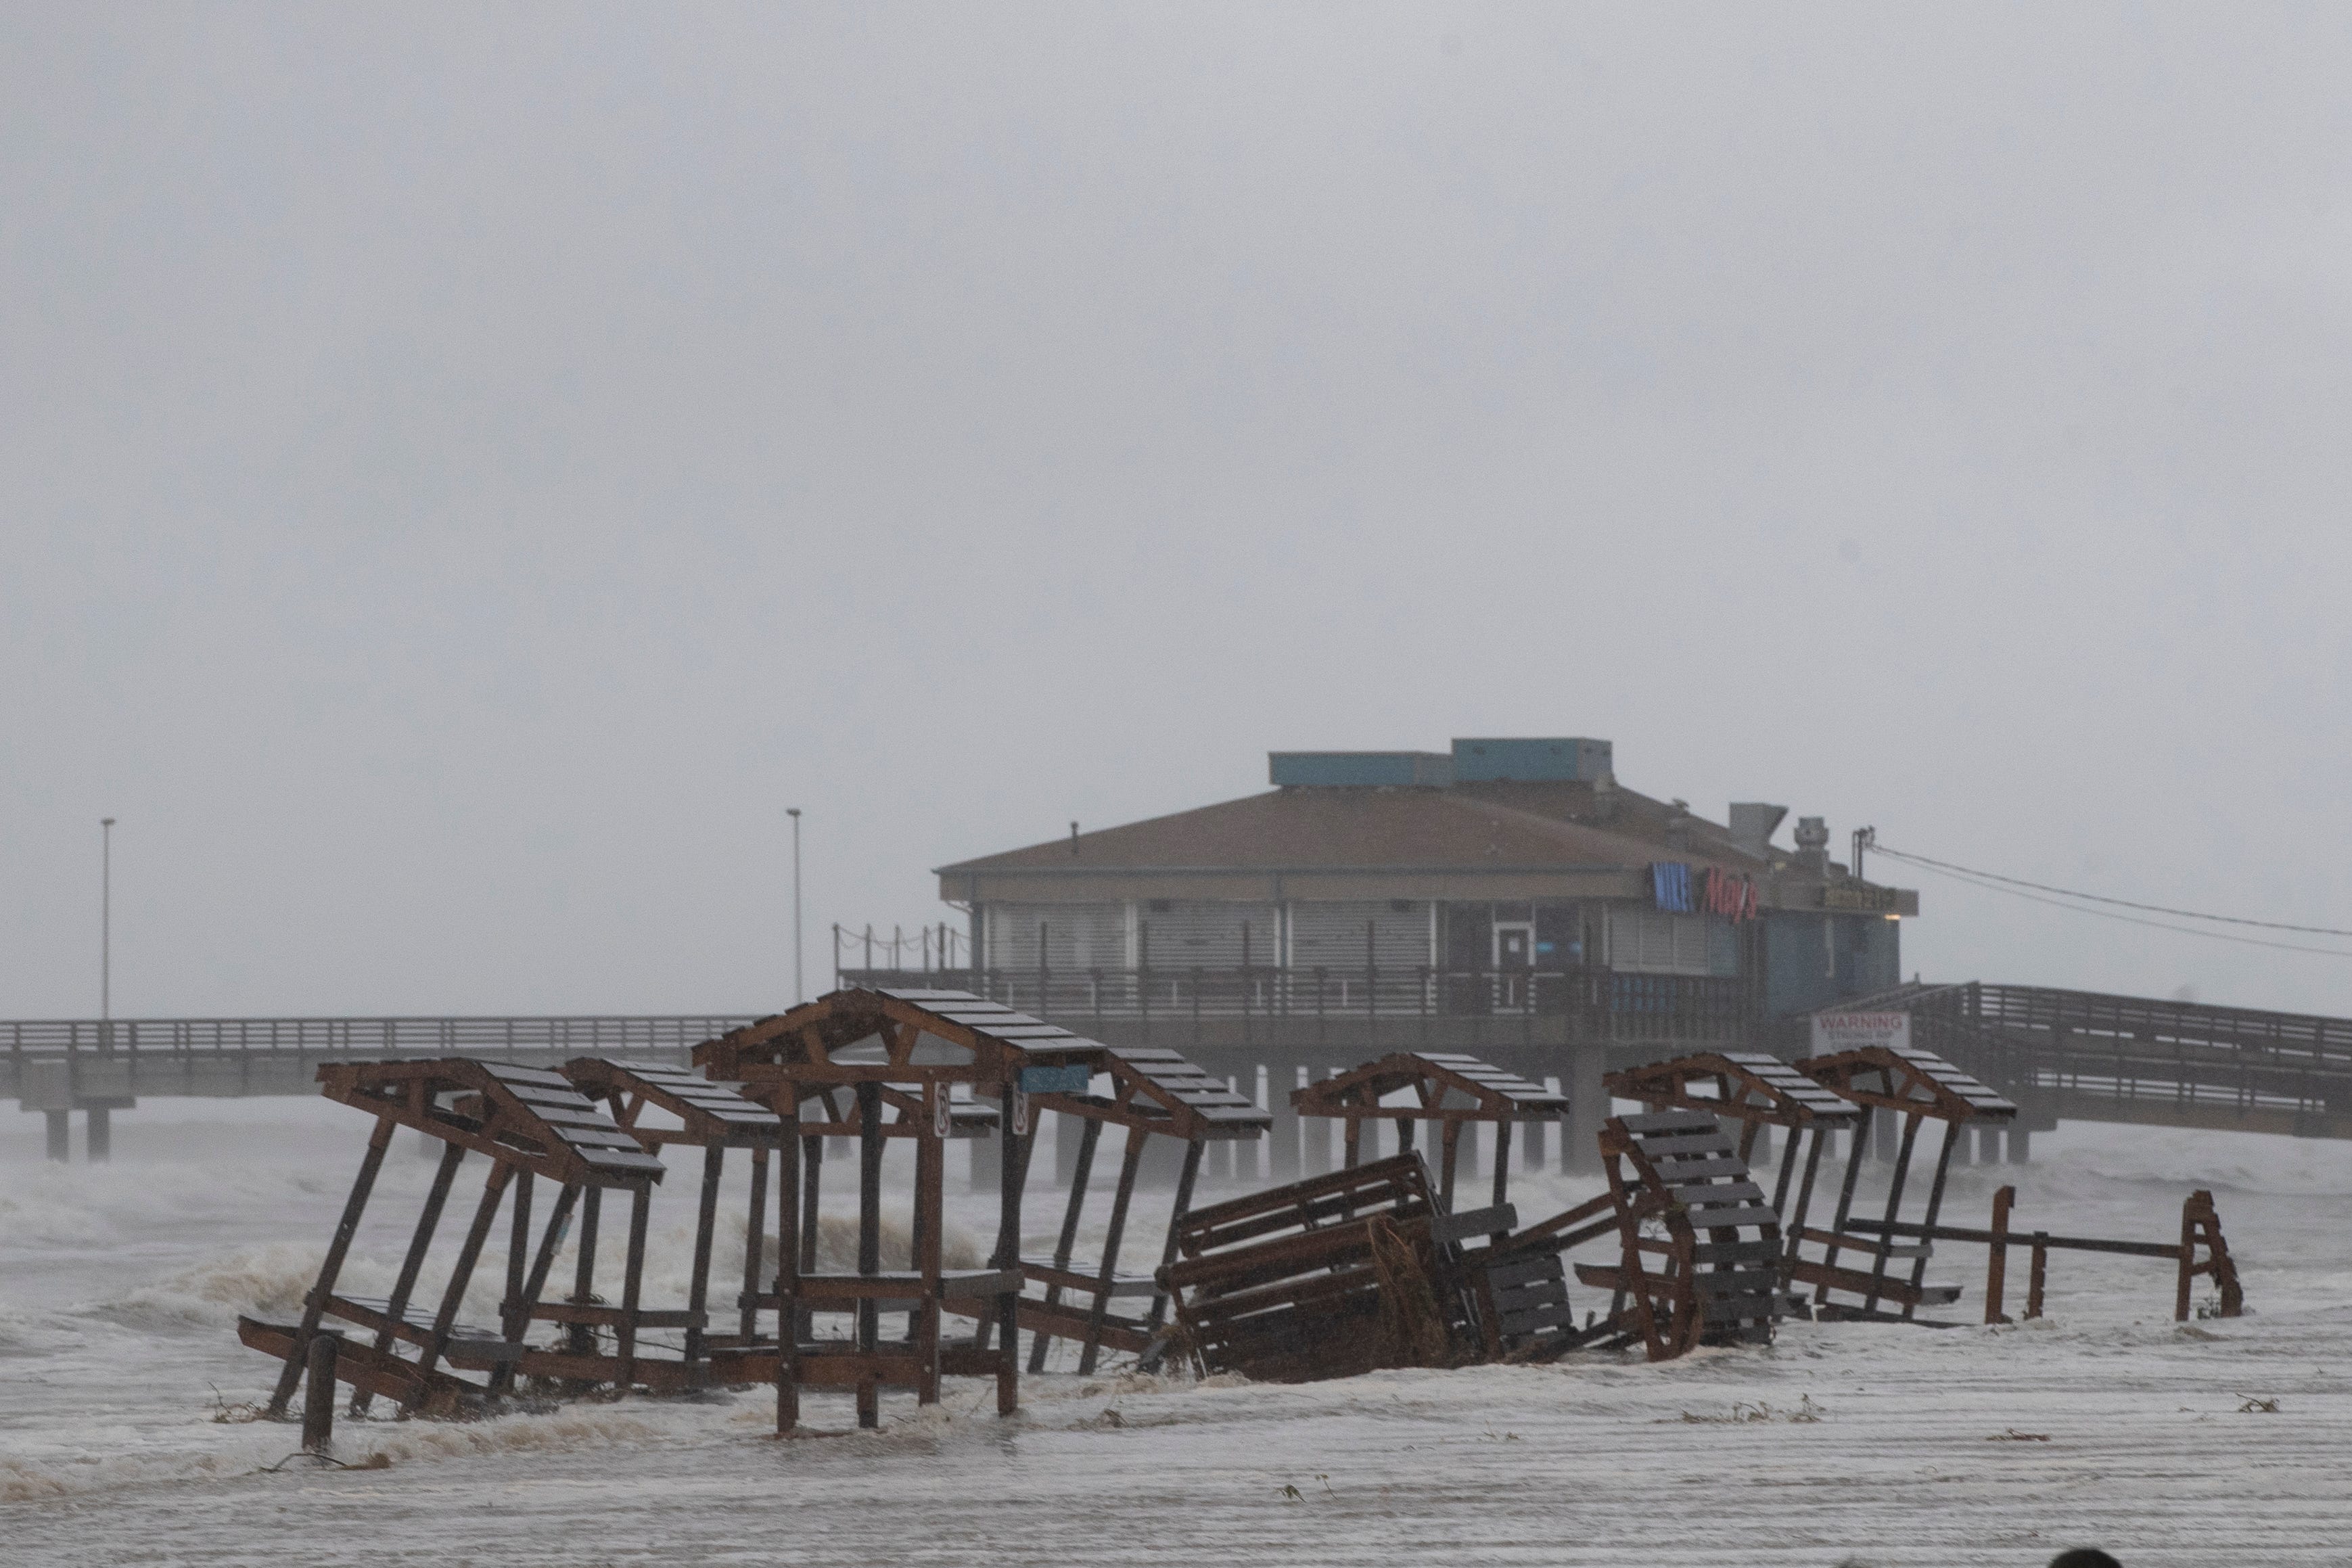 Bob Hall Pier Torn Down Replaced After Hurricane Hanna Damage